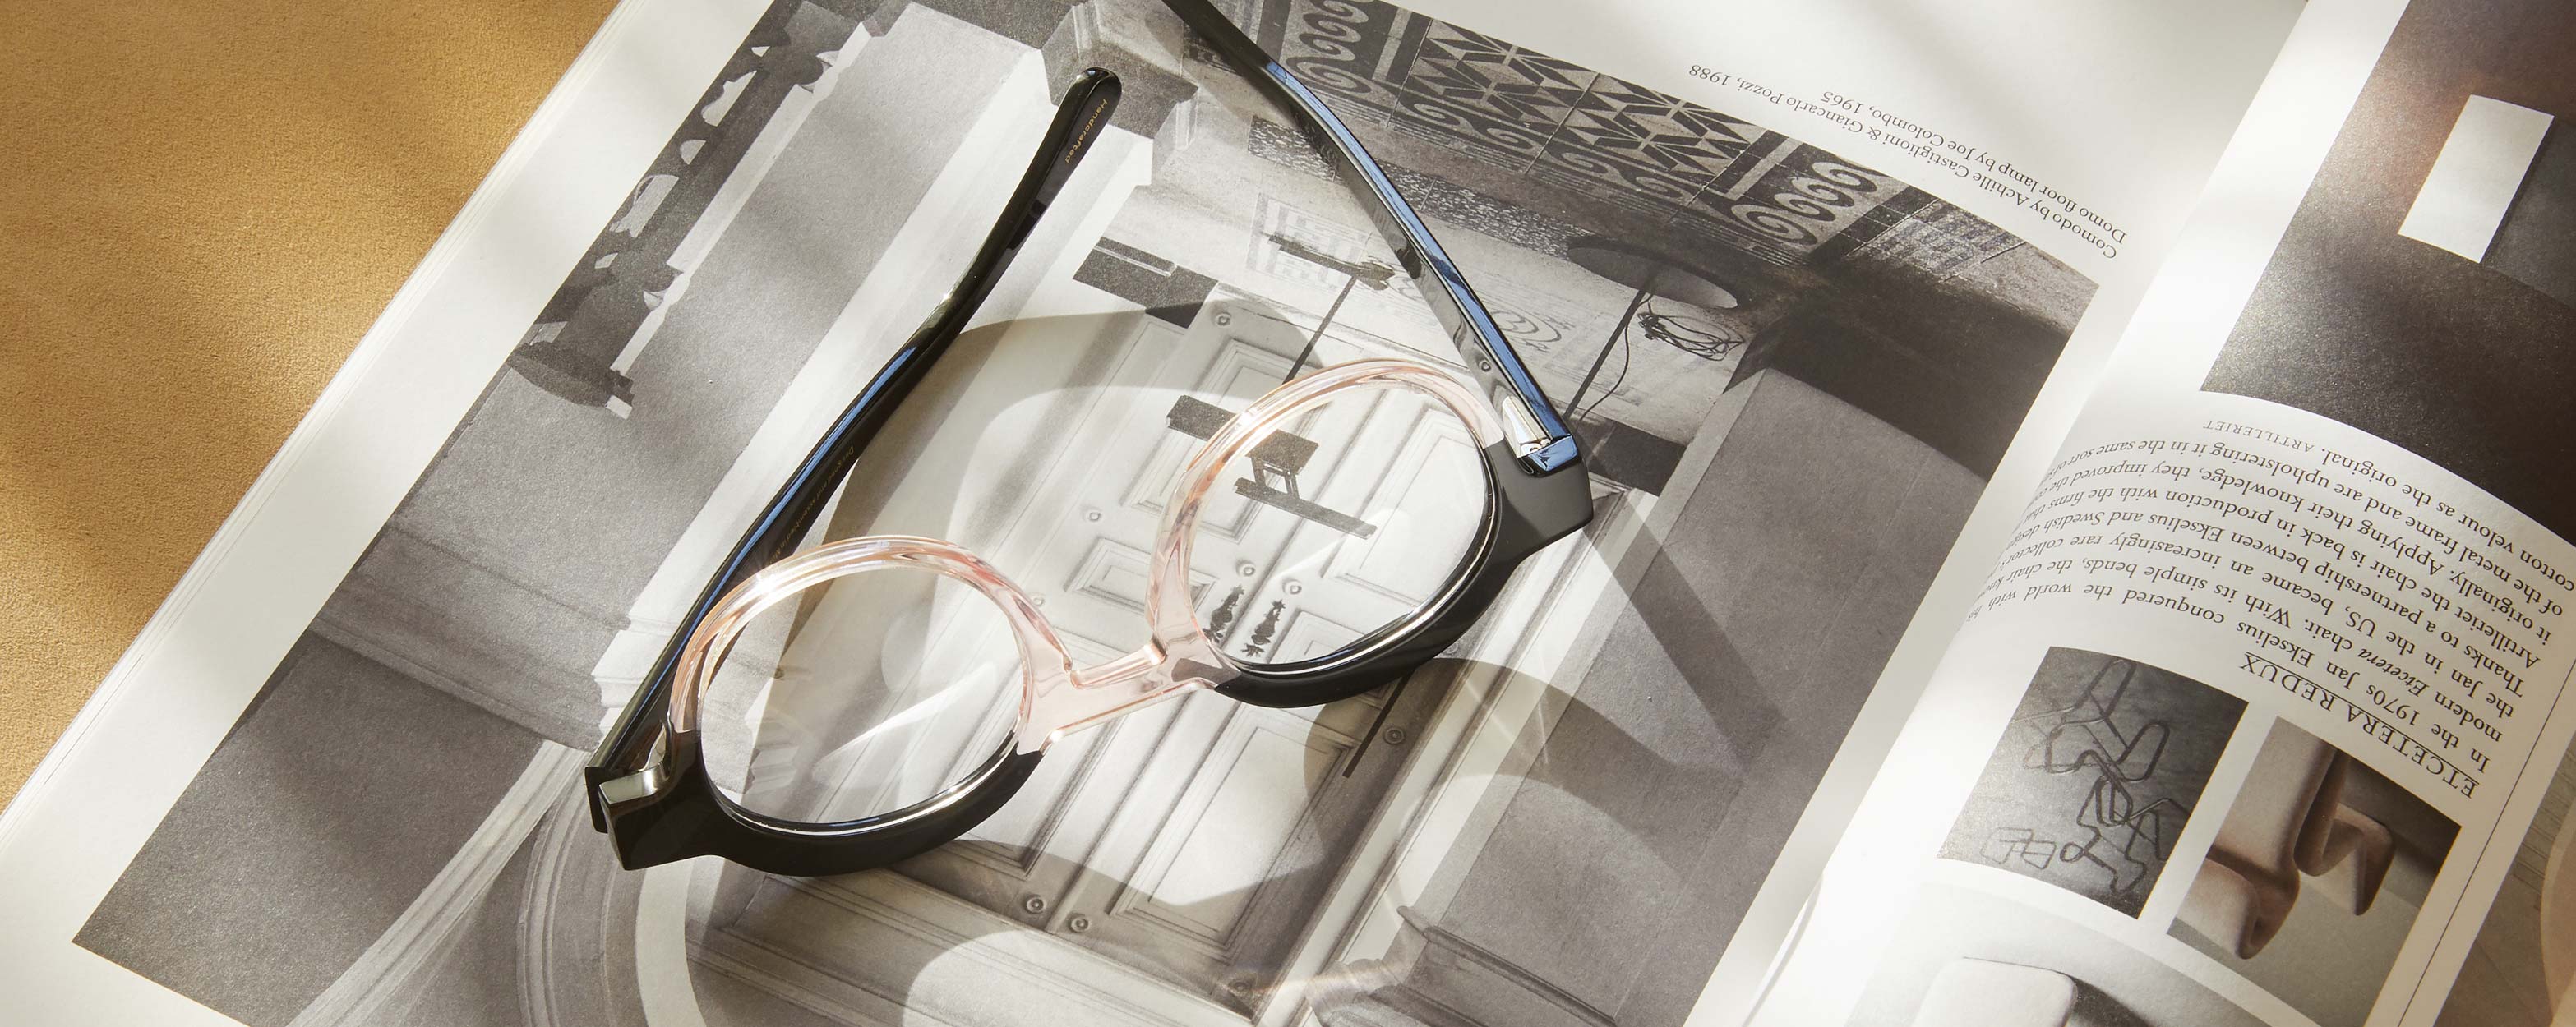 Photo Details of Charlotte Nude & Tortoise Reading Glasses in a room